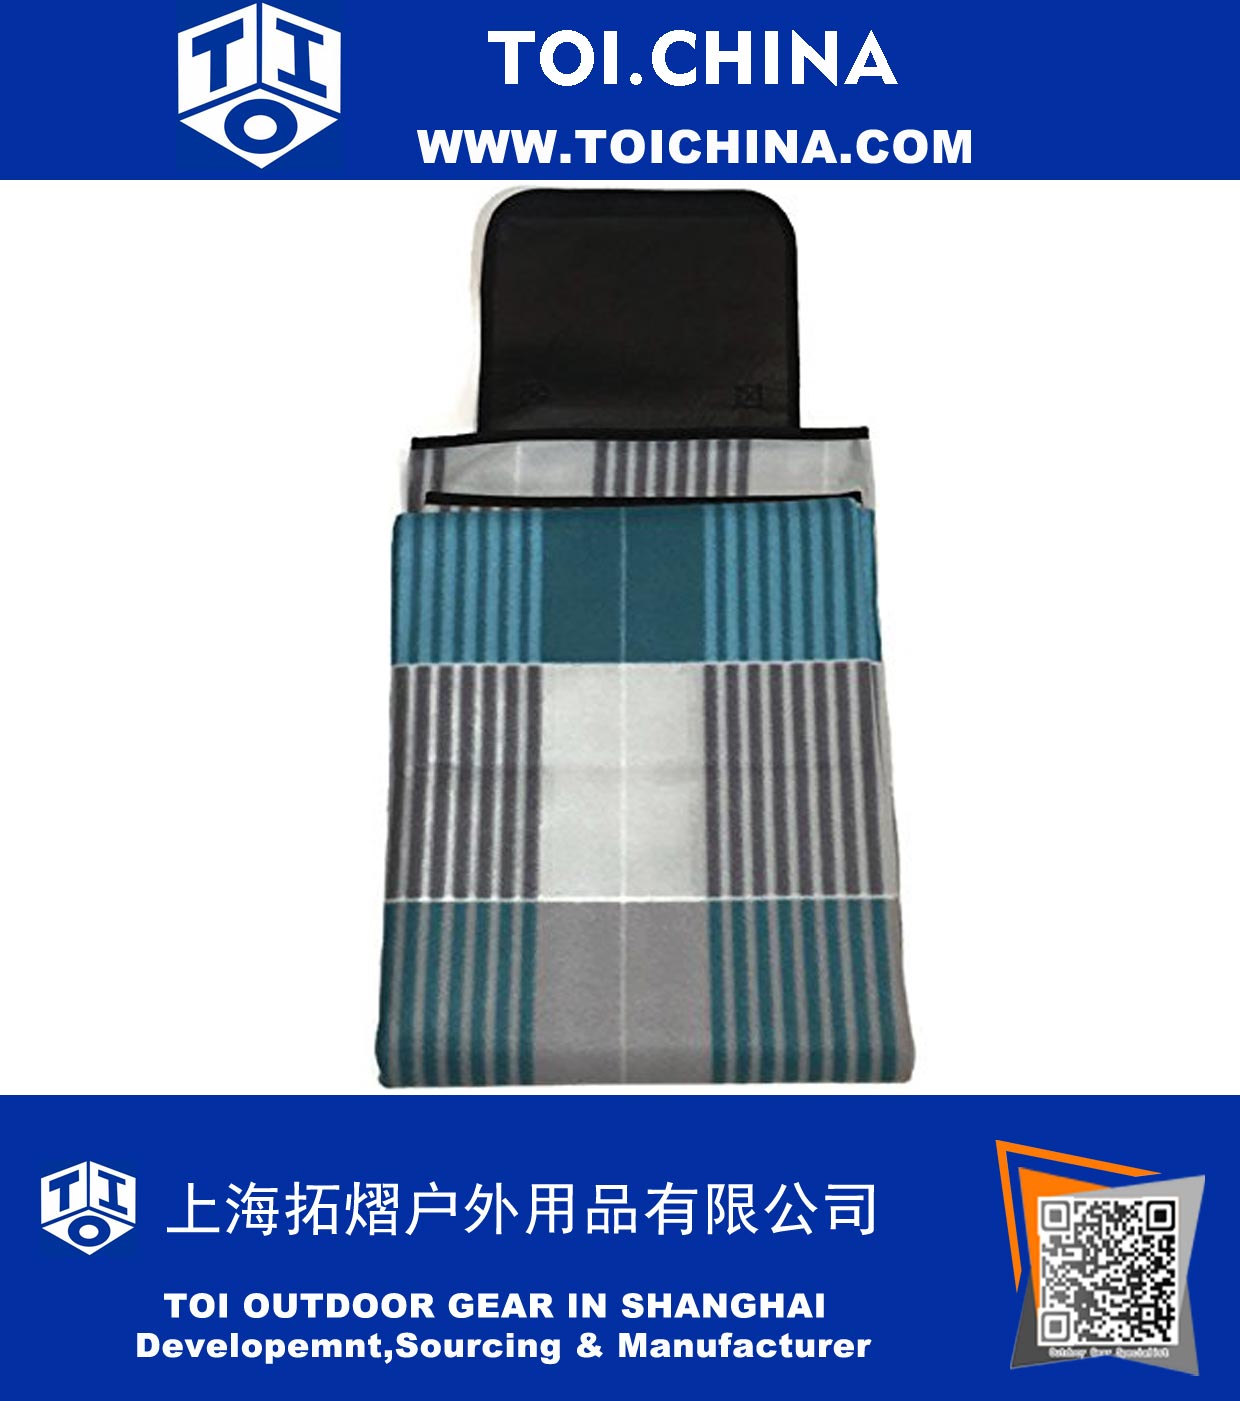 Large Outdoor Picnic Blanket